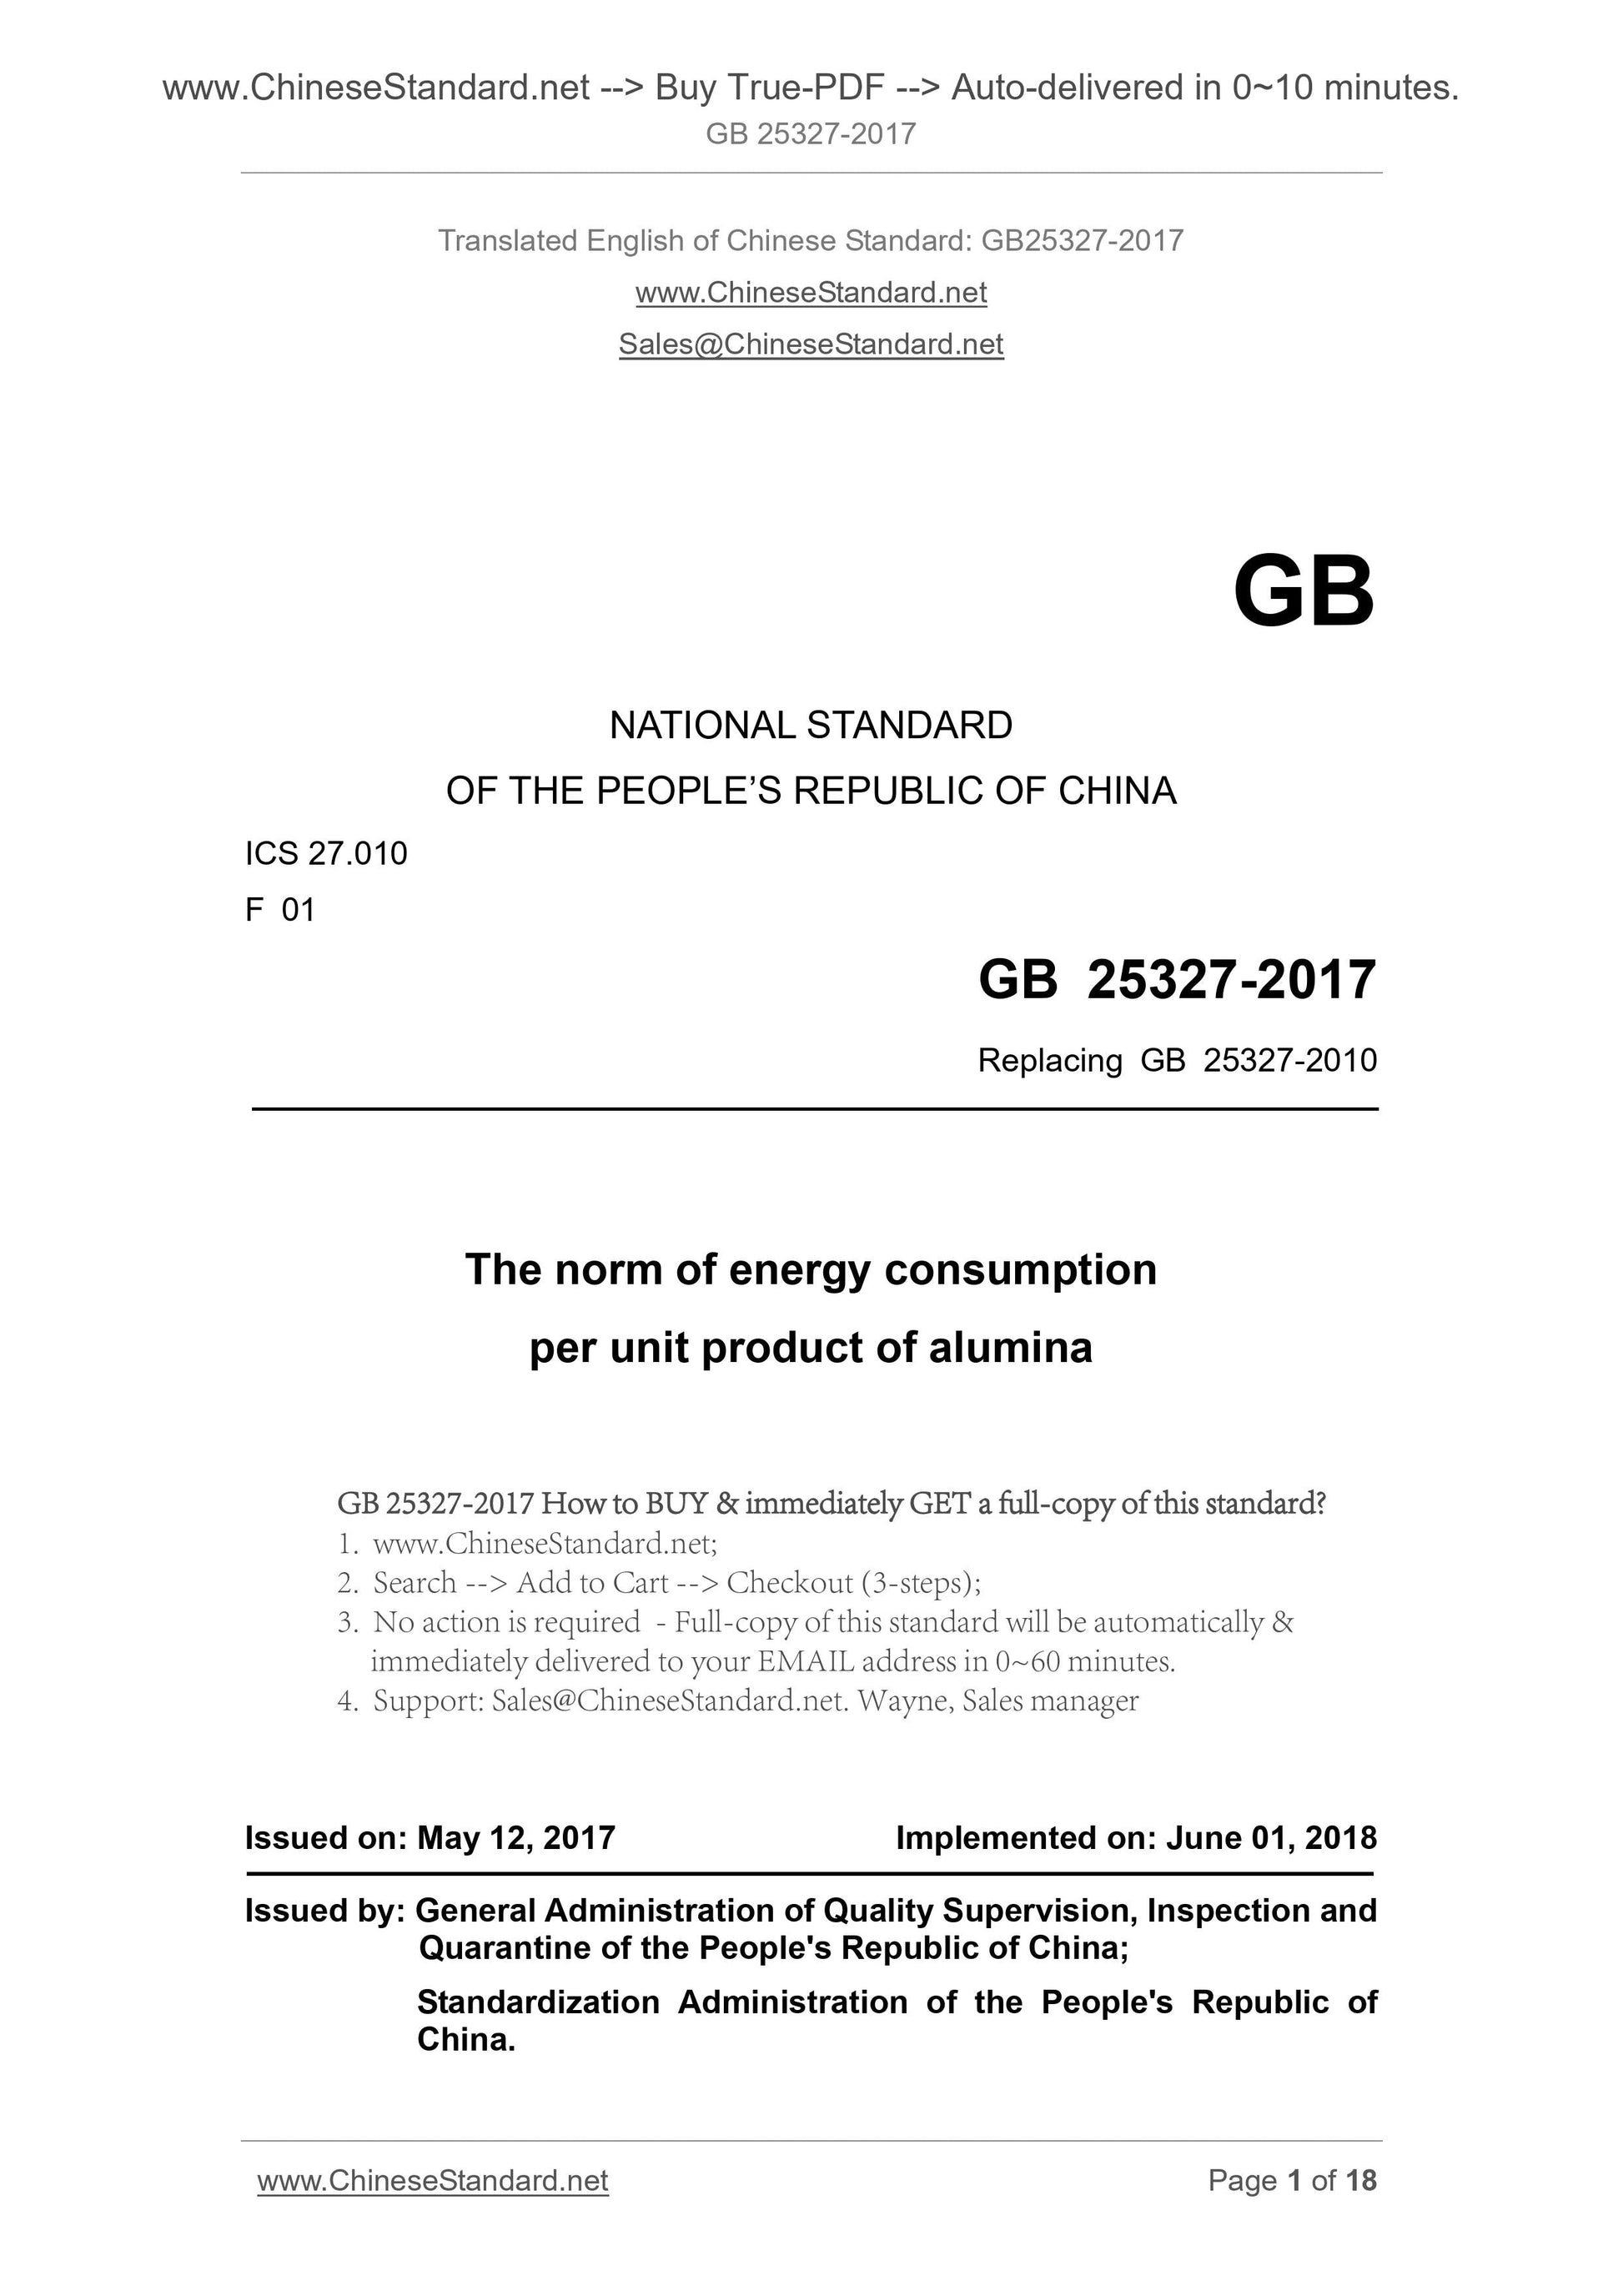 GB 25327-2017 Page 1